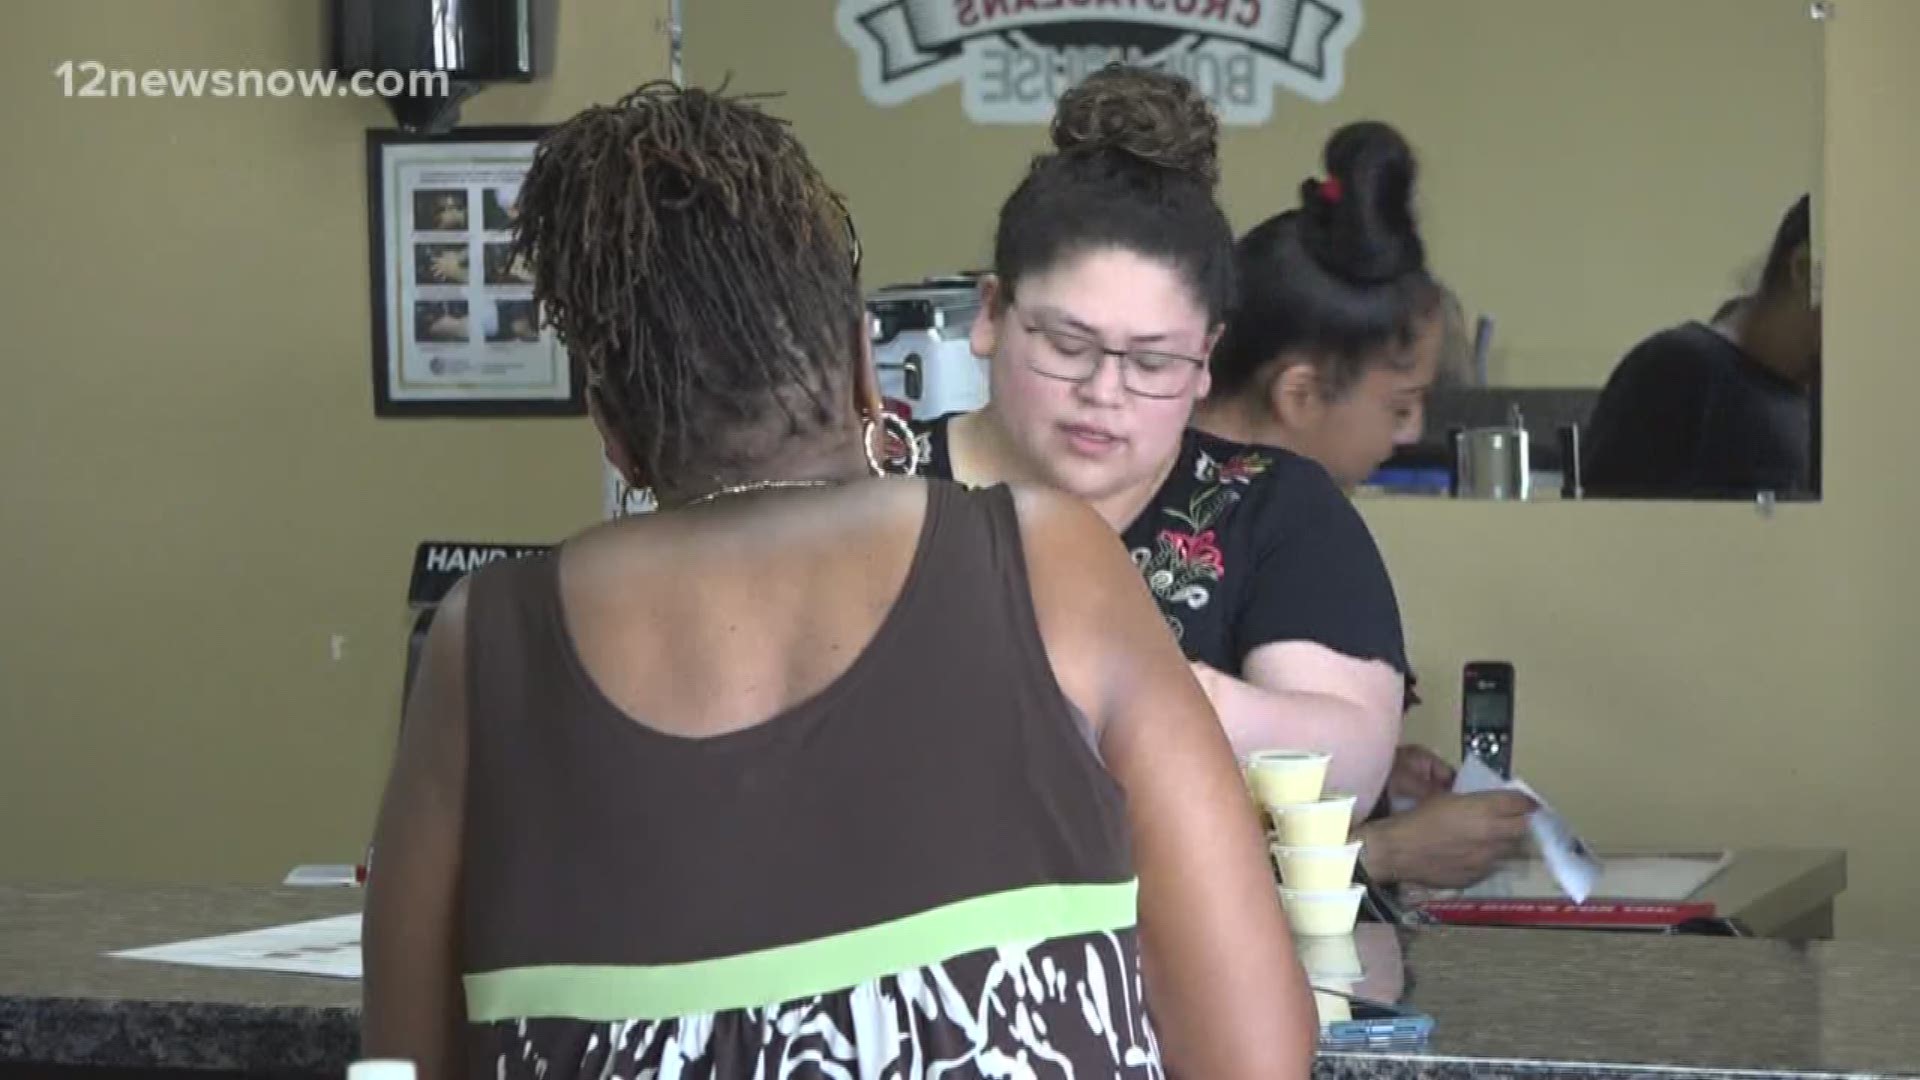 The Black Business Professionals of Southeast Texas says several businesses are seeing an increase in revenue and first-time customers.